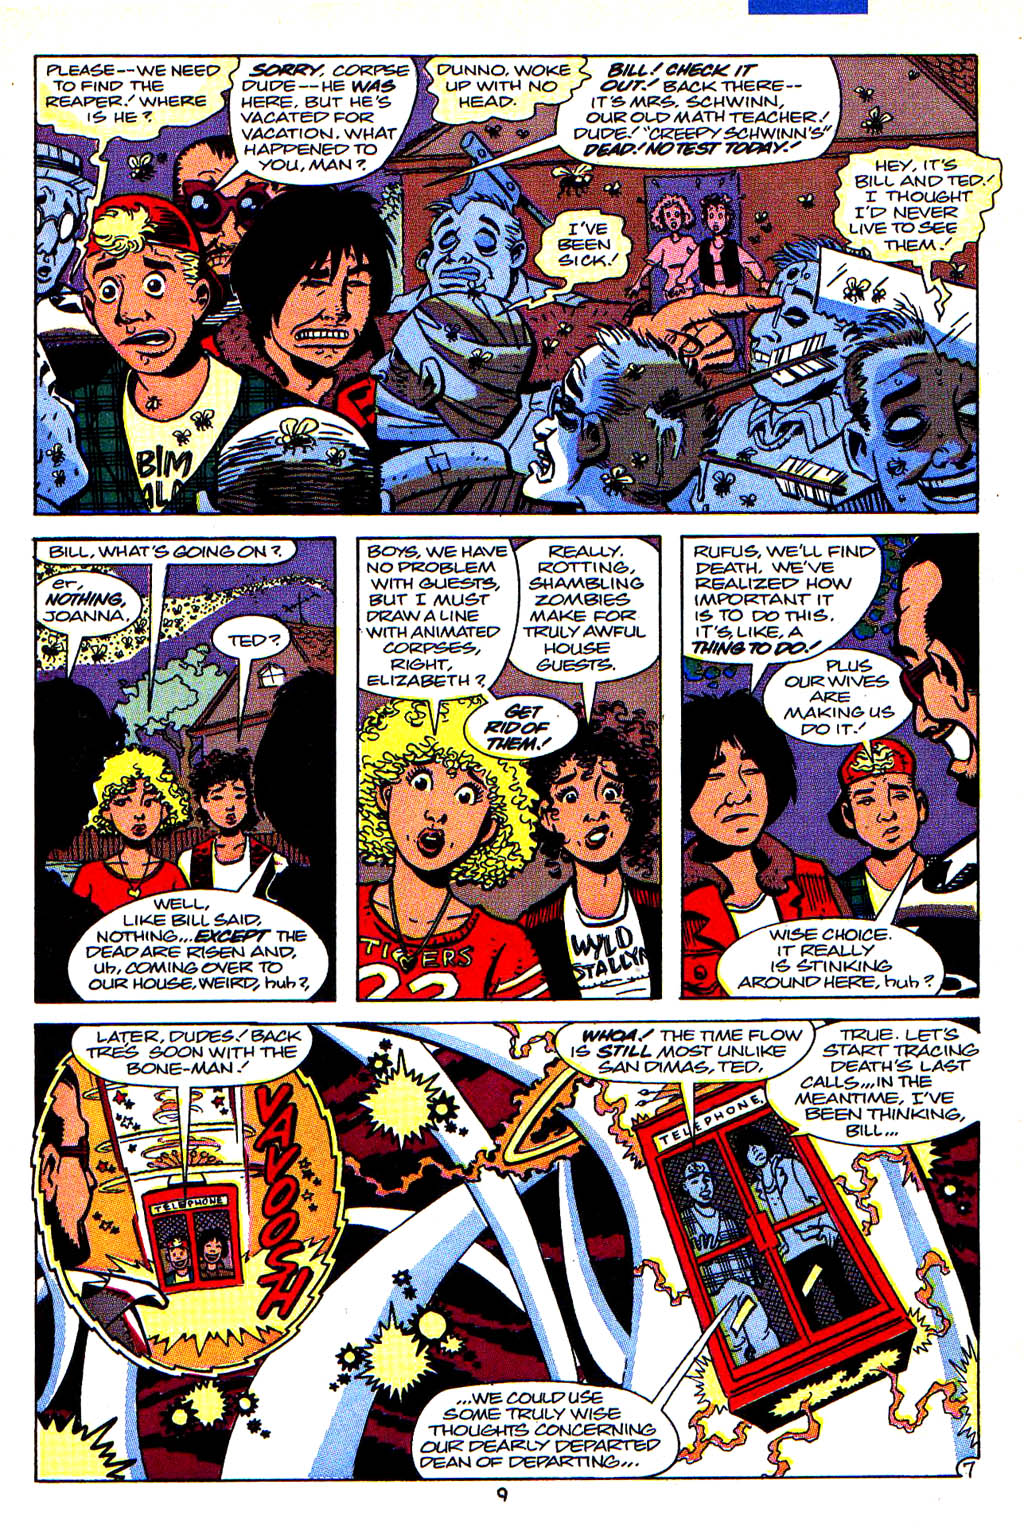 Read online Bill & Ted's Excellent Comic Book comic -  Issue #2 - 8